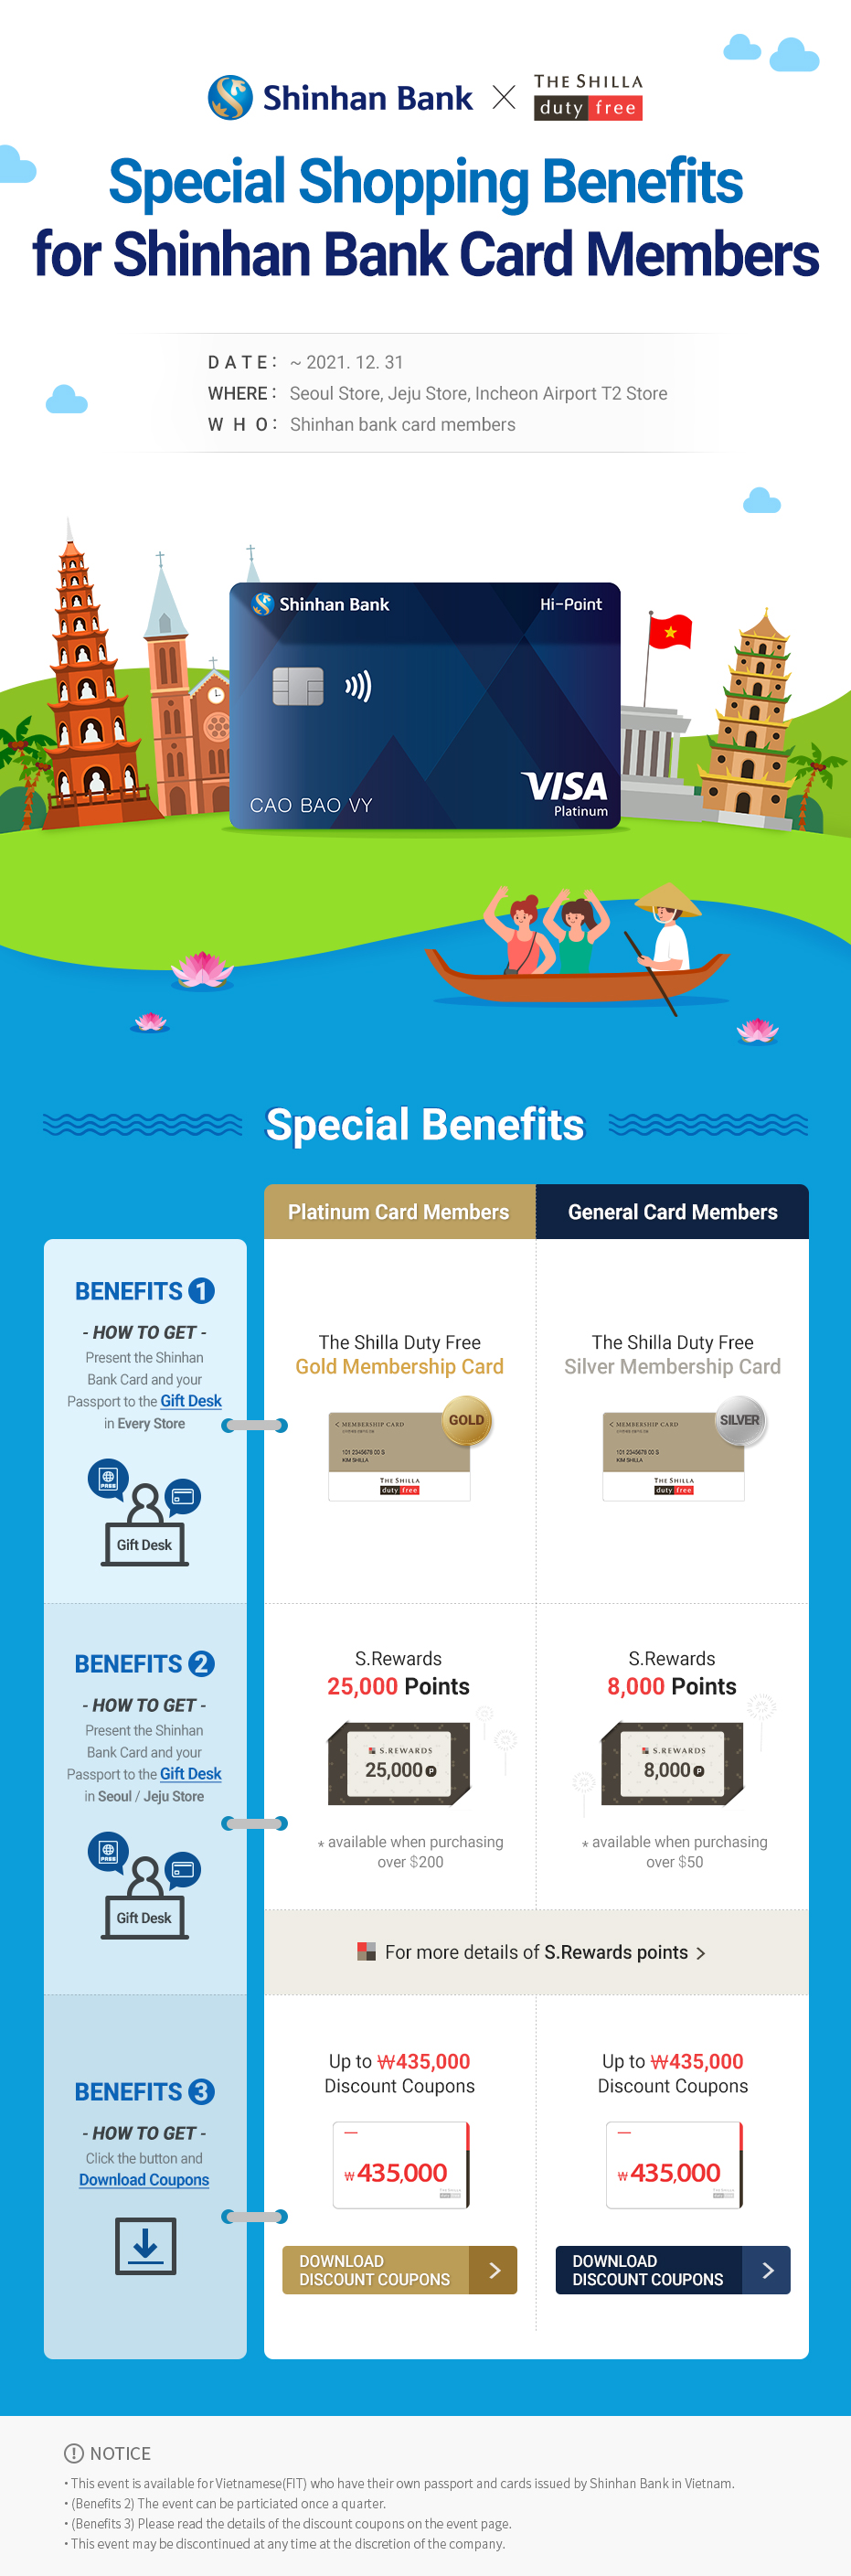 Special Benefits for Vietnam Shinan Bank Card Holders